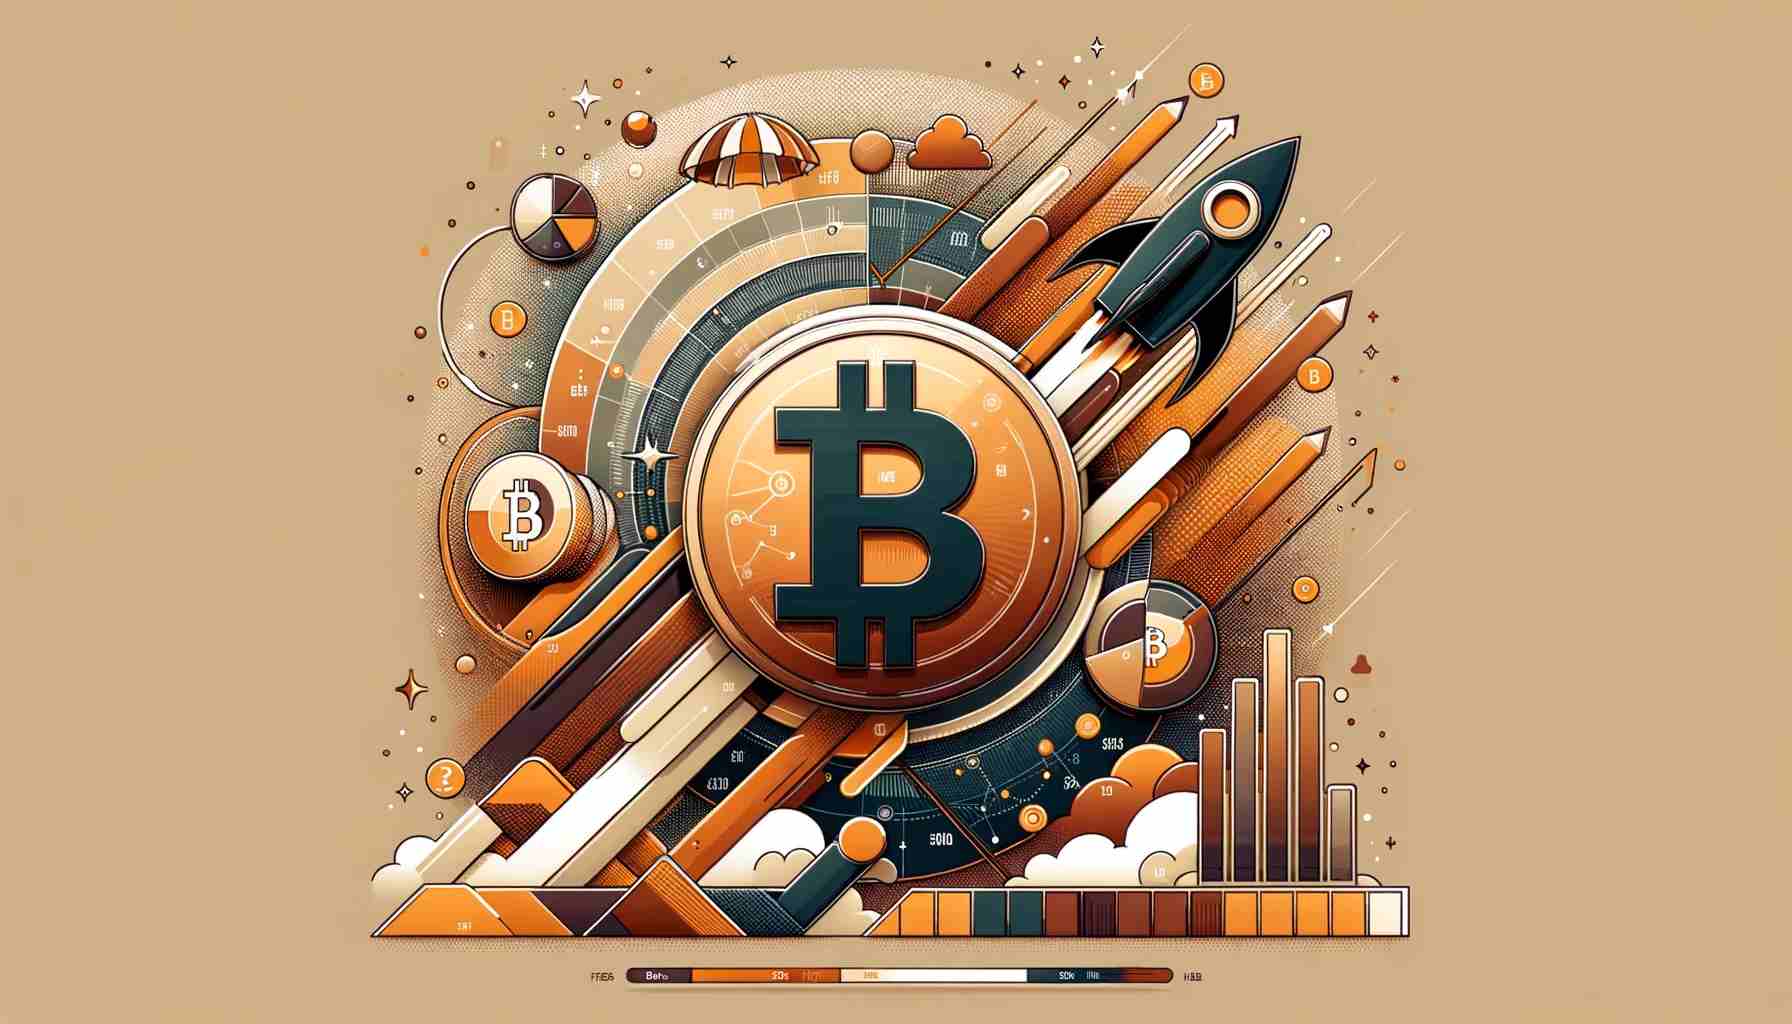 Bitcoin to explode? The author of “The Bullish Case for Bitcoin” says…